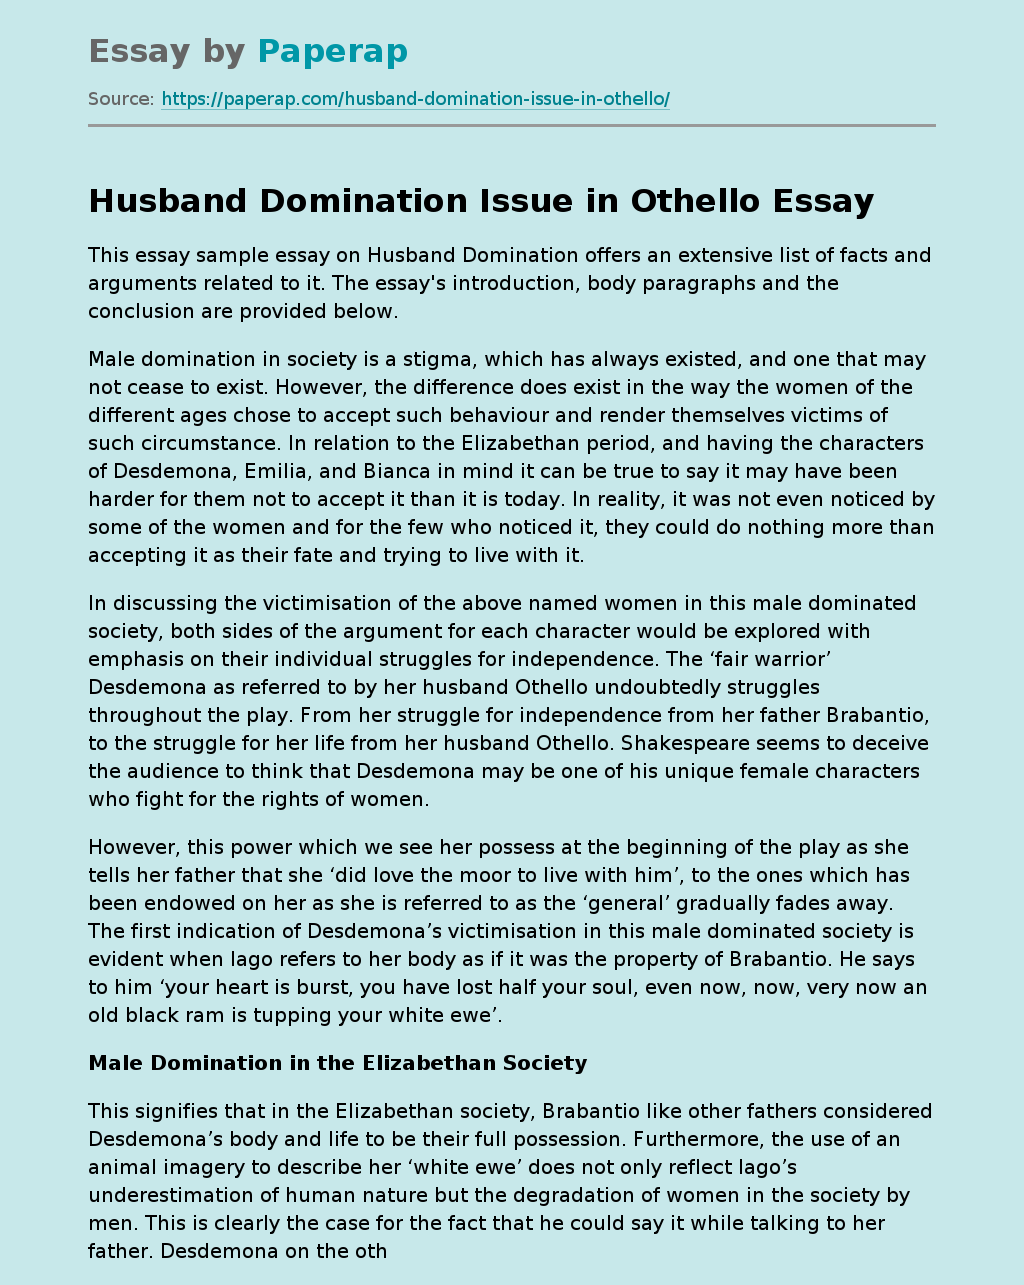 Husband Domination Issue in Othello